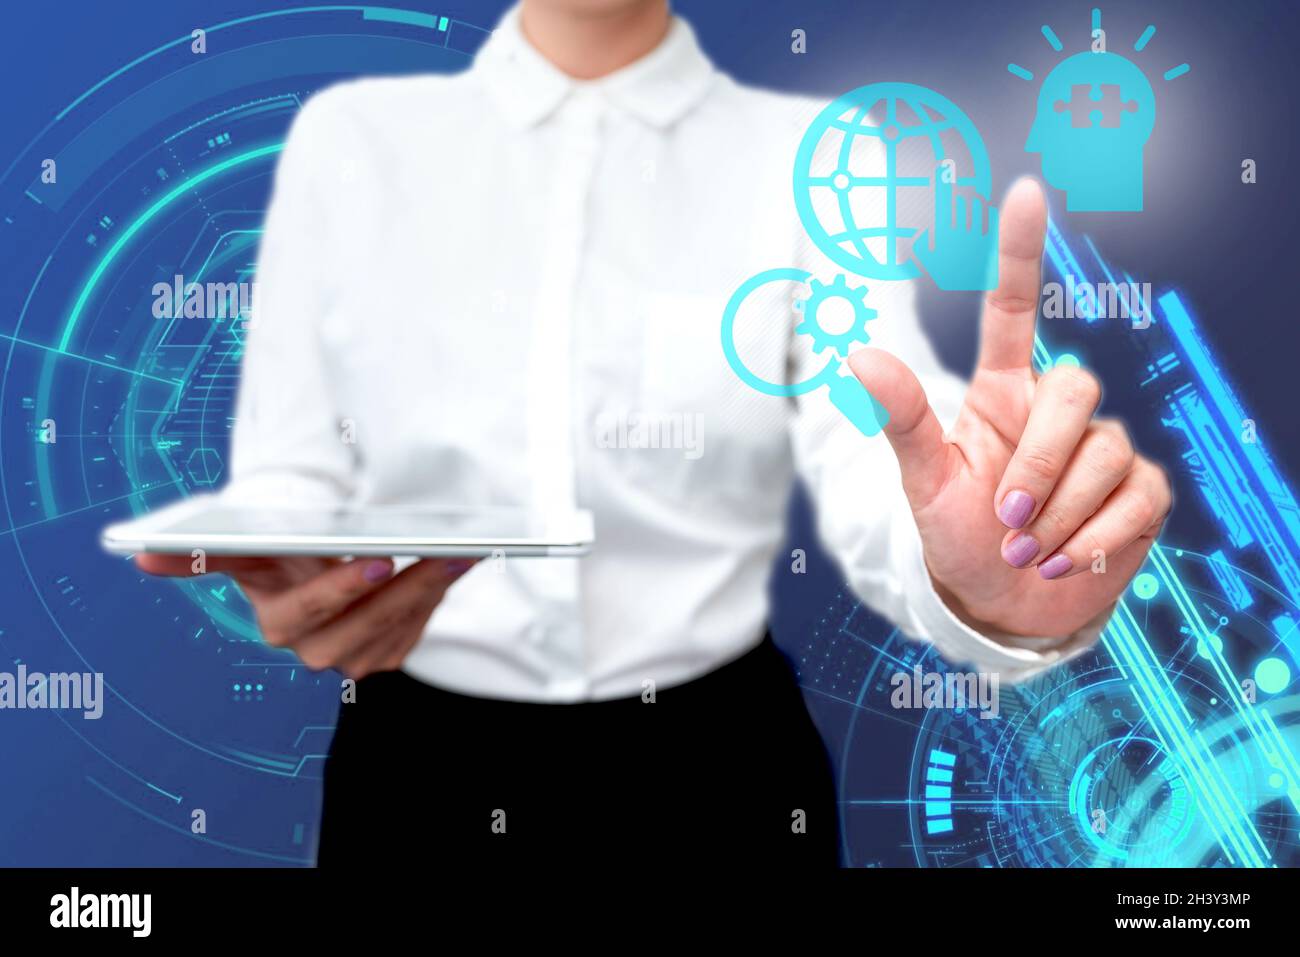 Lady In Uniform Standing Holding Tablet In Hand Pressing Virtual Globe Button. Bussiness Woman Carrying Tab Poining For New Futu Stock Photo